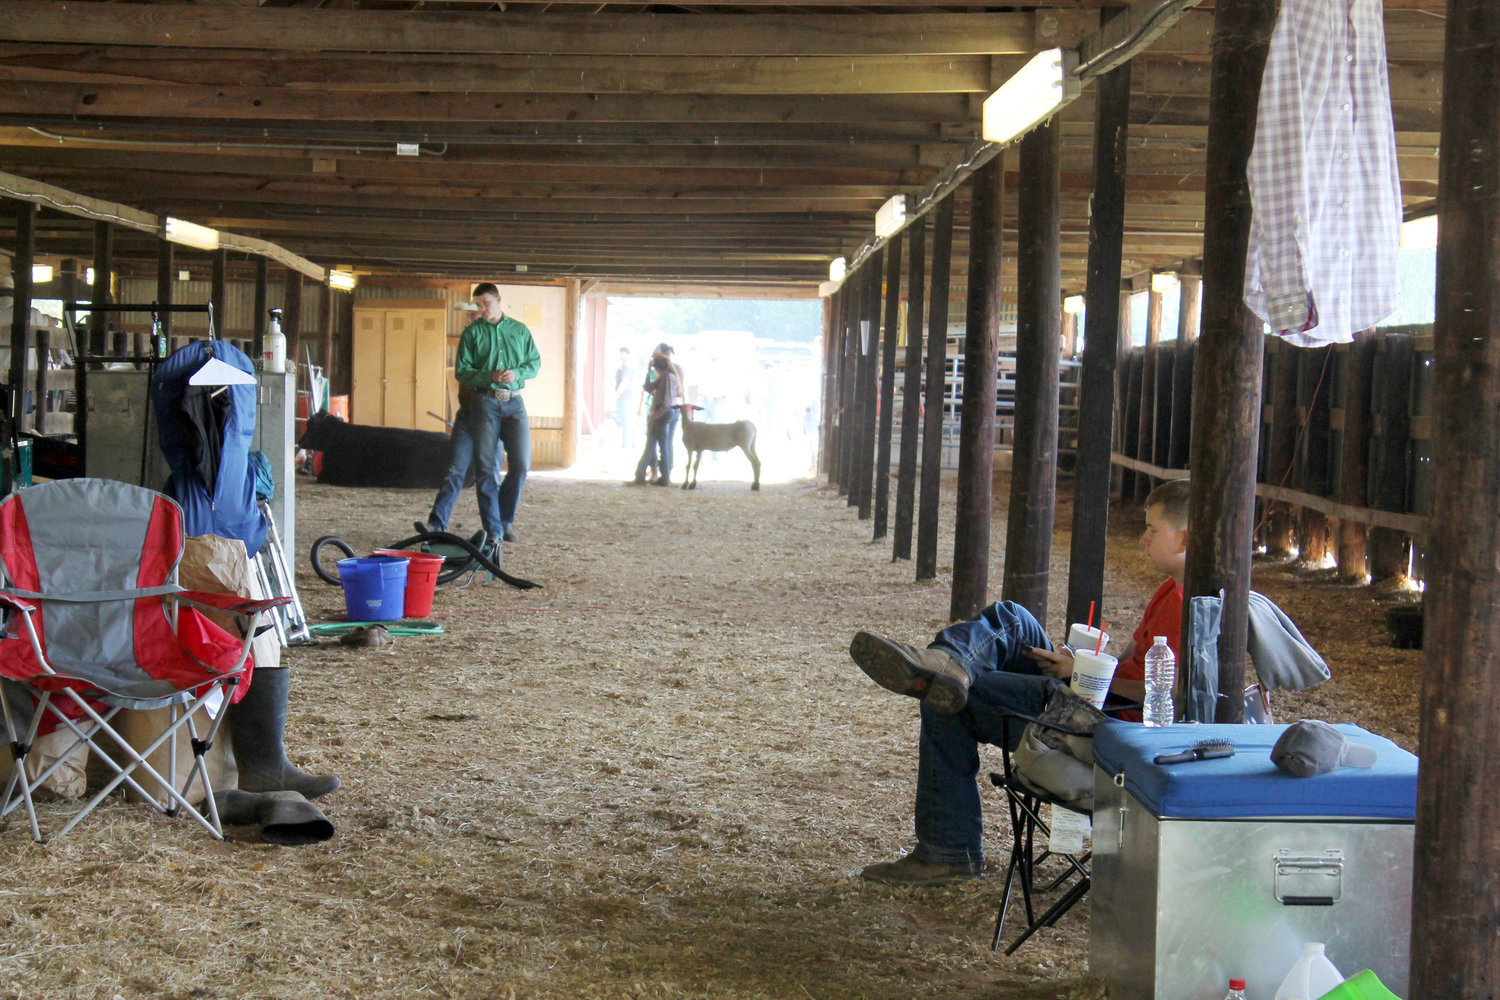 The show barn becomes a quiet, lonely place while most of the activity is occurring in the rings during Saturday’s Mineola Junior Livestock Show.